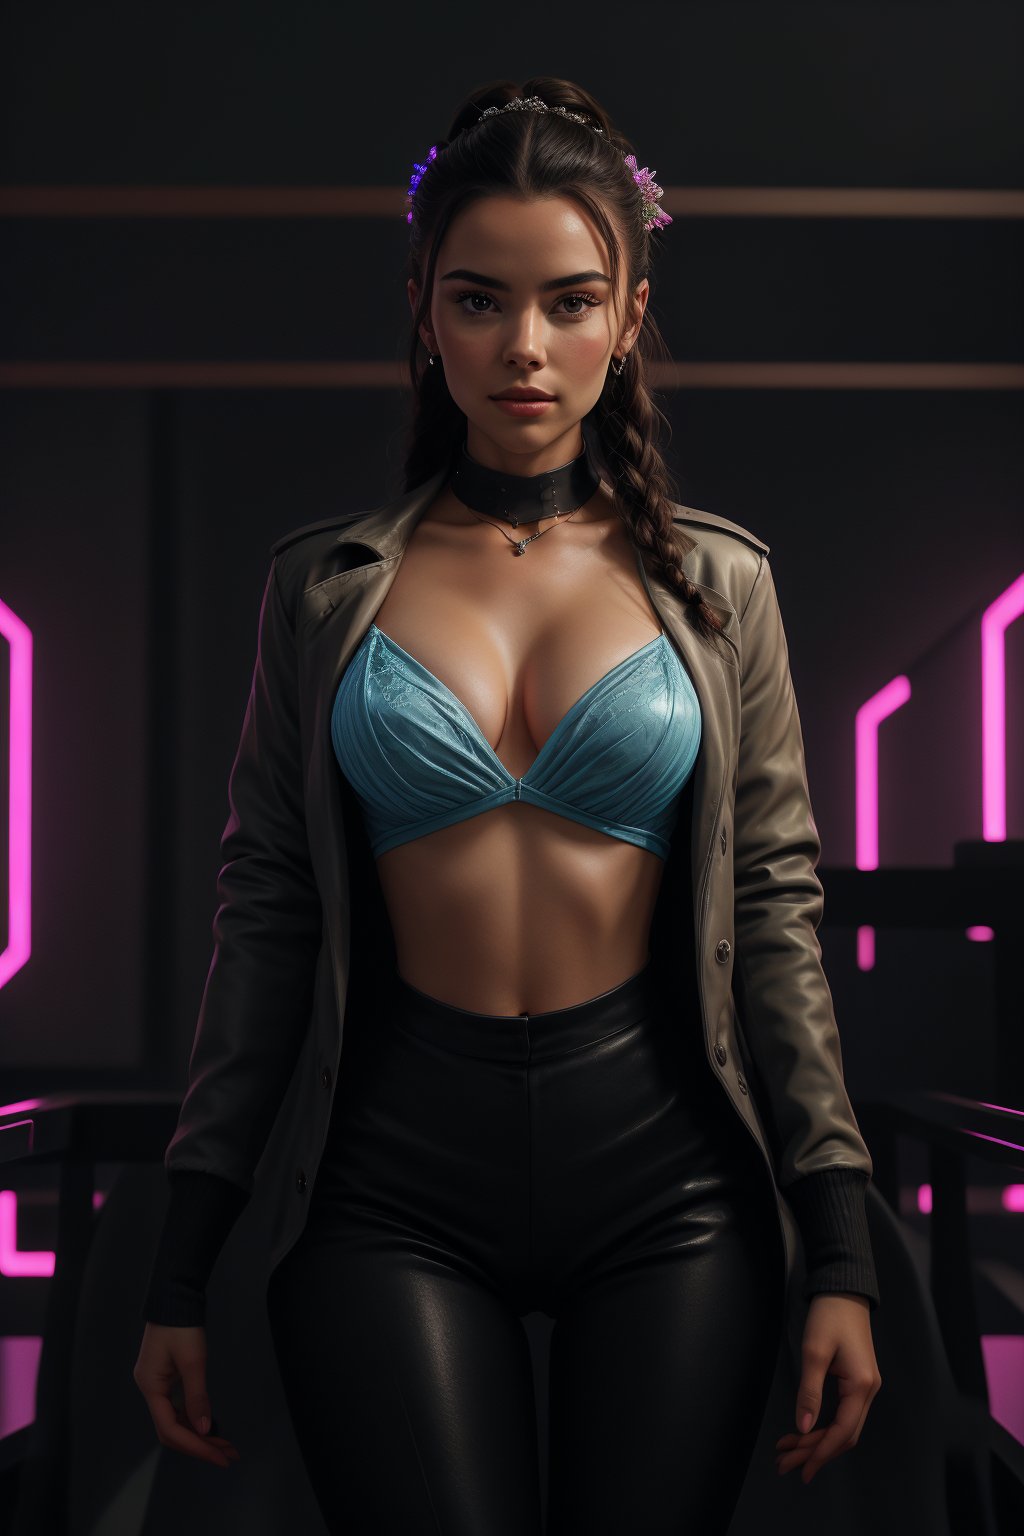 A 25-year-old woman with a fit body and long, six pack abs, dark hair adorned with a hair ornament, stands solo in a futuristic room illuminated by neon lights. Her brown eyes lock onto the viewer as she wears a designer blouse and jacket, paired with a turtle-neck sweater underneath. A braided ponytail flows down her back, and her plump lips curve into a subtle smile. She's dressed in a long skirt, black high-waisted pants, and a bioluminescent dress that glows softly. Her navel is exposed, and she wears a necklace, earrings, and ring. The camera captures her looking directly at us, with a realistic, photorealistic focus on her features.,Fit body